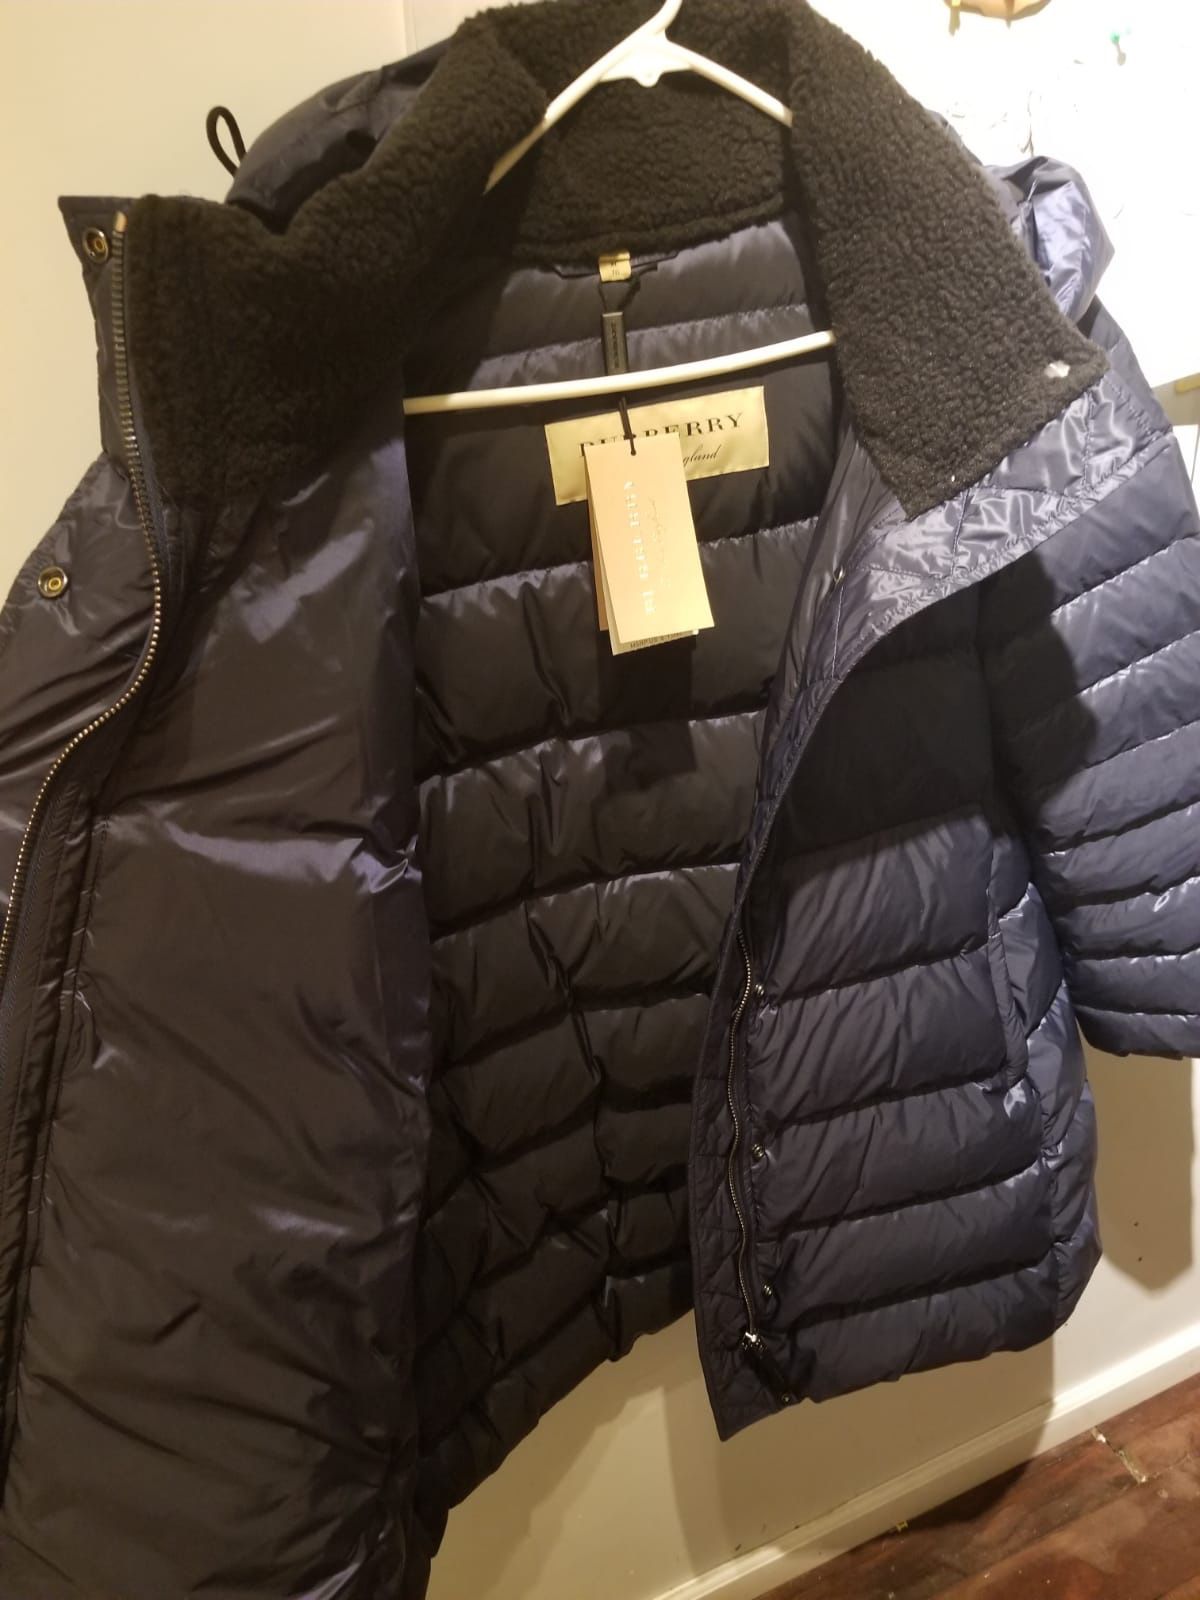 Brand new coats Burberry XL and S & Moncler M